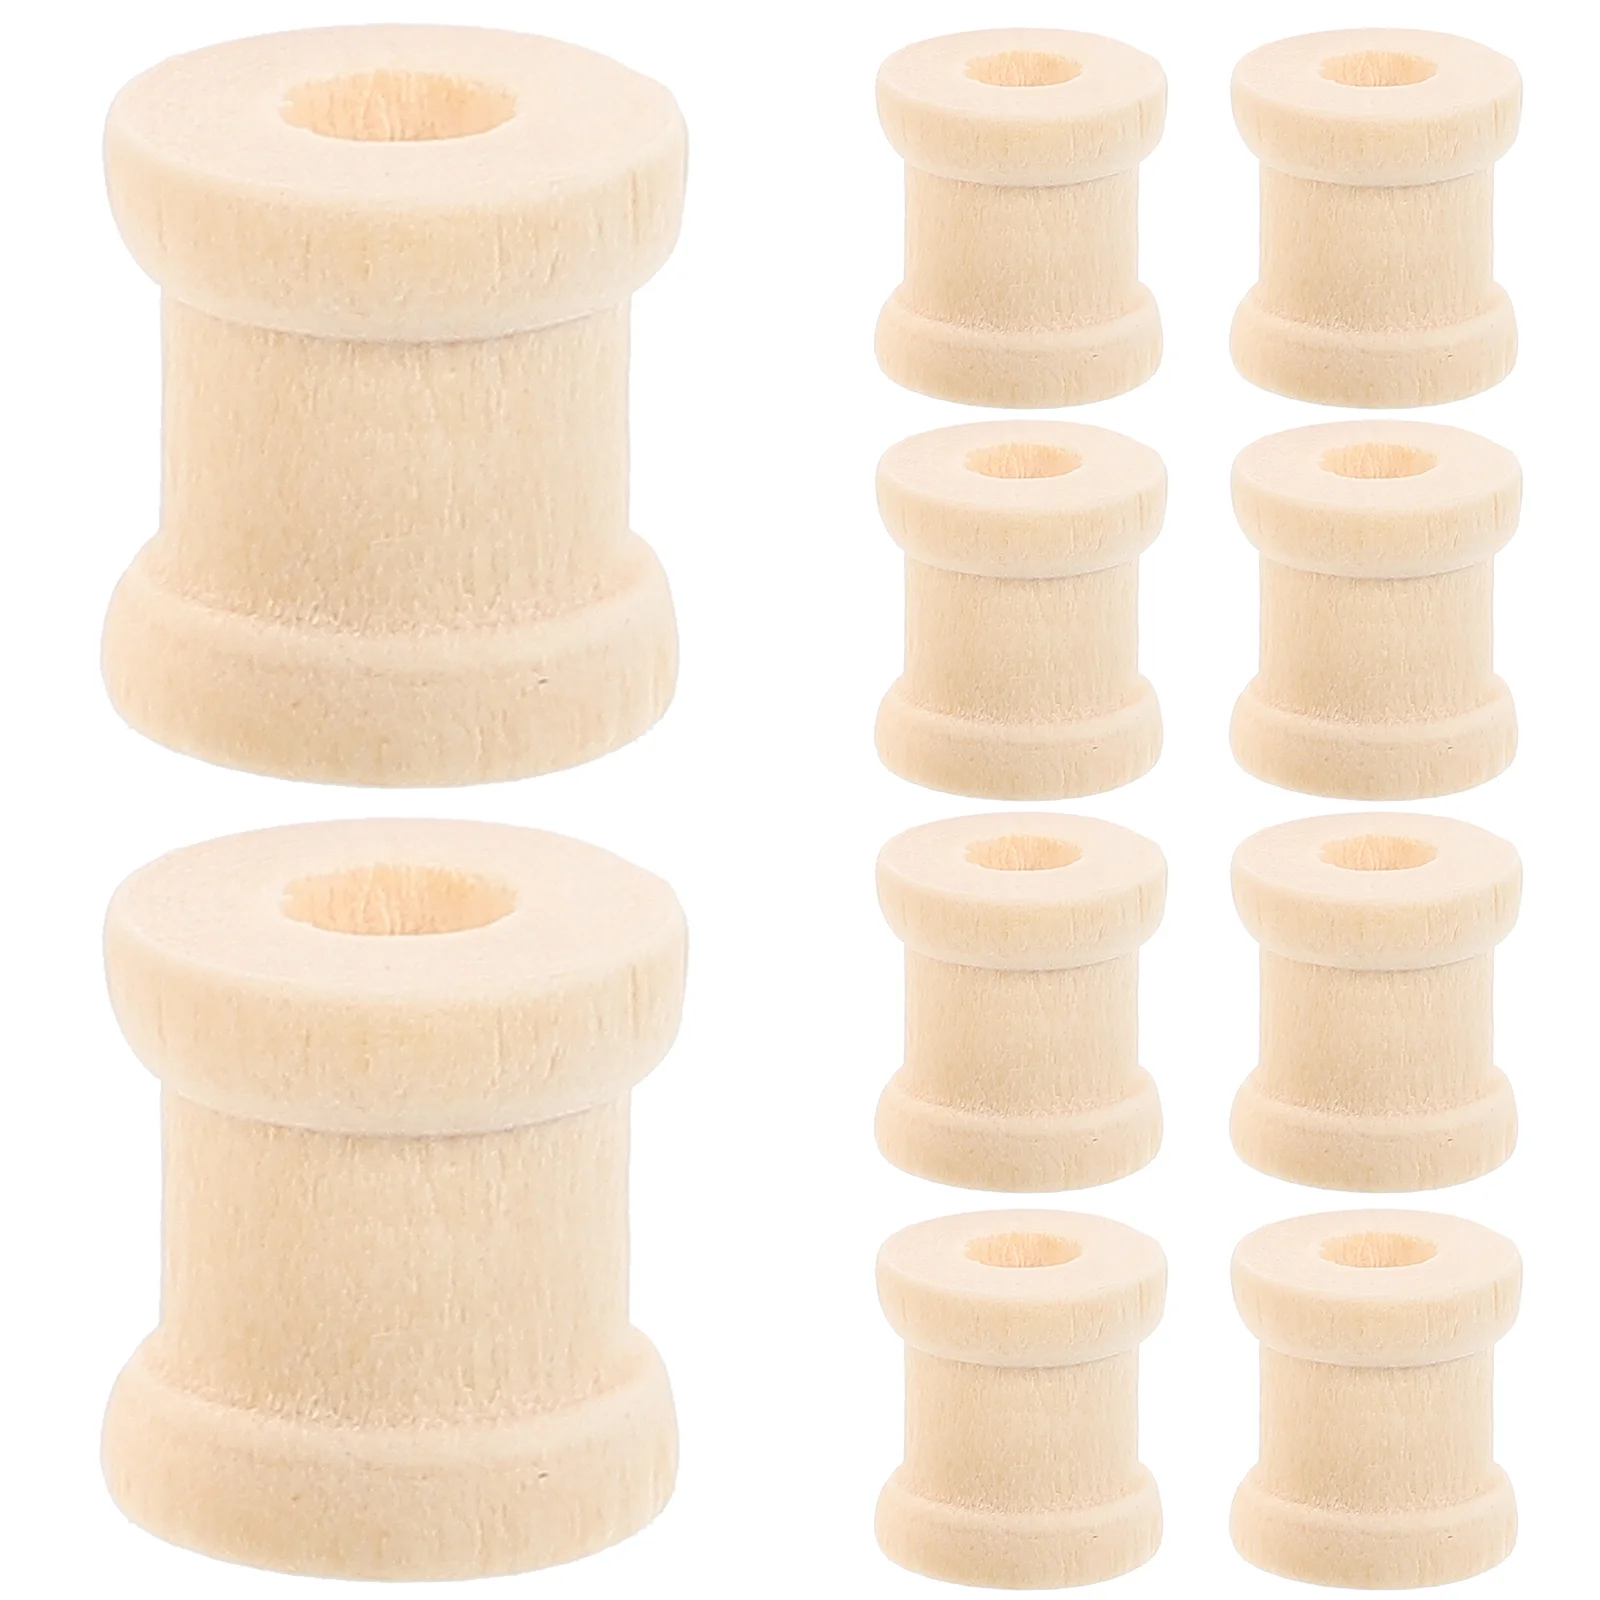 100PCS Unfinished Wooden Thread Spools Weaving Bobbins Empty Thread Spool  for Embroidery Thread Pom Ribbon Crafts Accessories